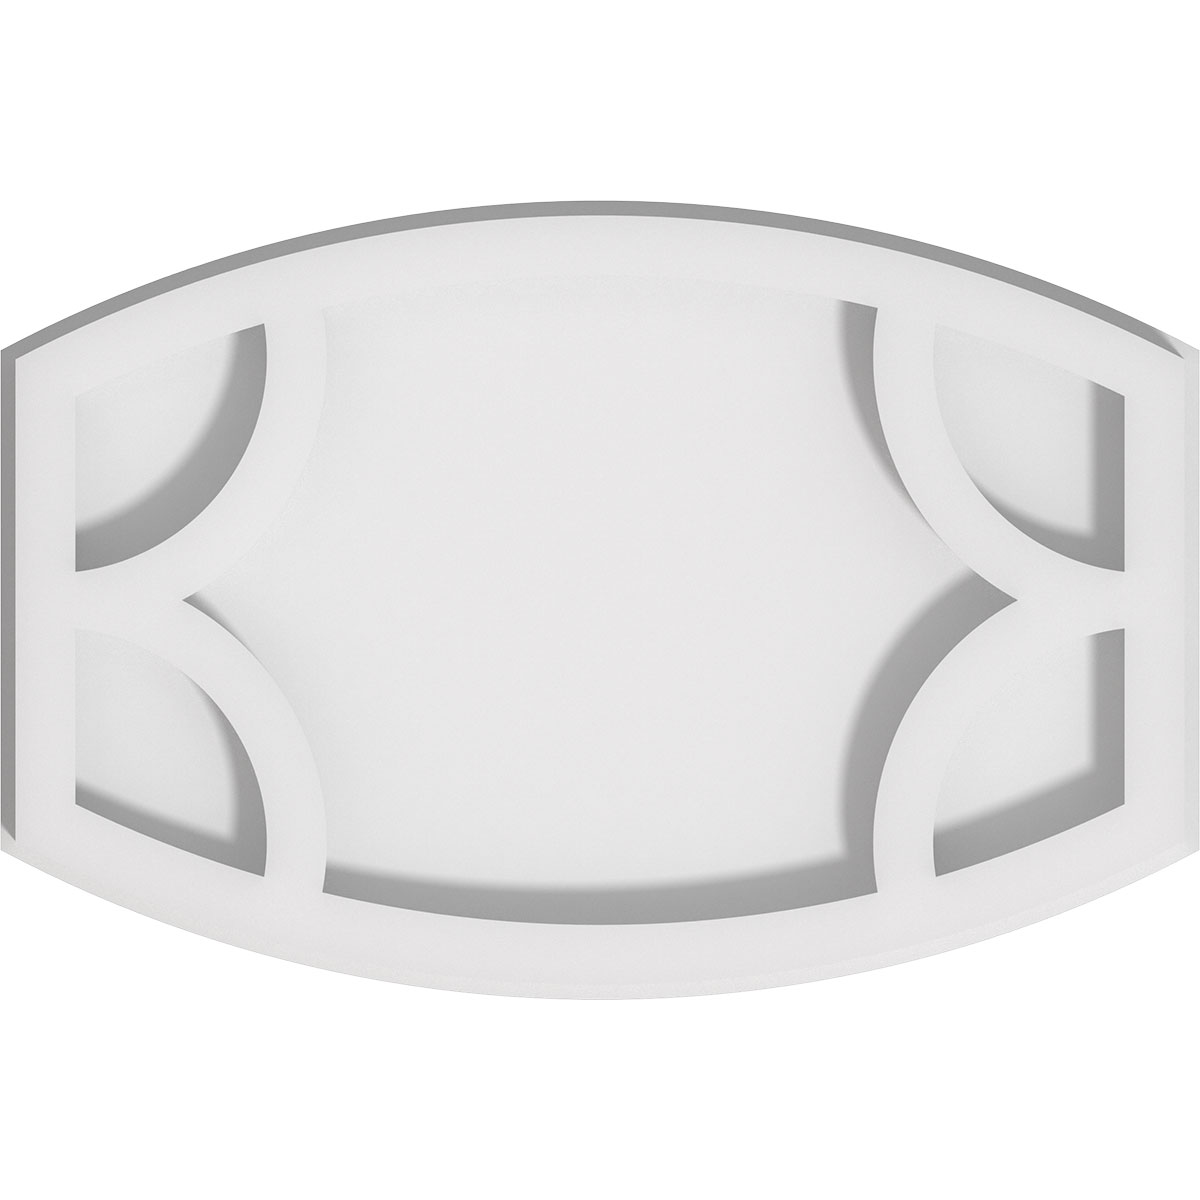 Cmp10x6ky 6.62 X 10 In. Rectangle Kailey Architectural Grade Pvc Contemporary Ceiling Medallion